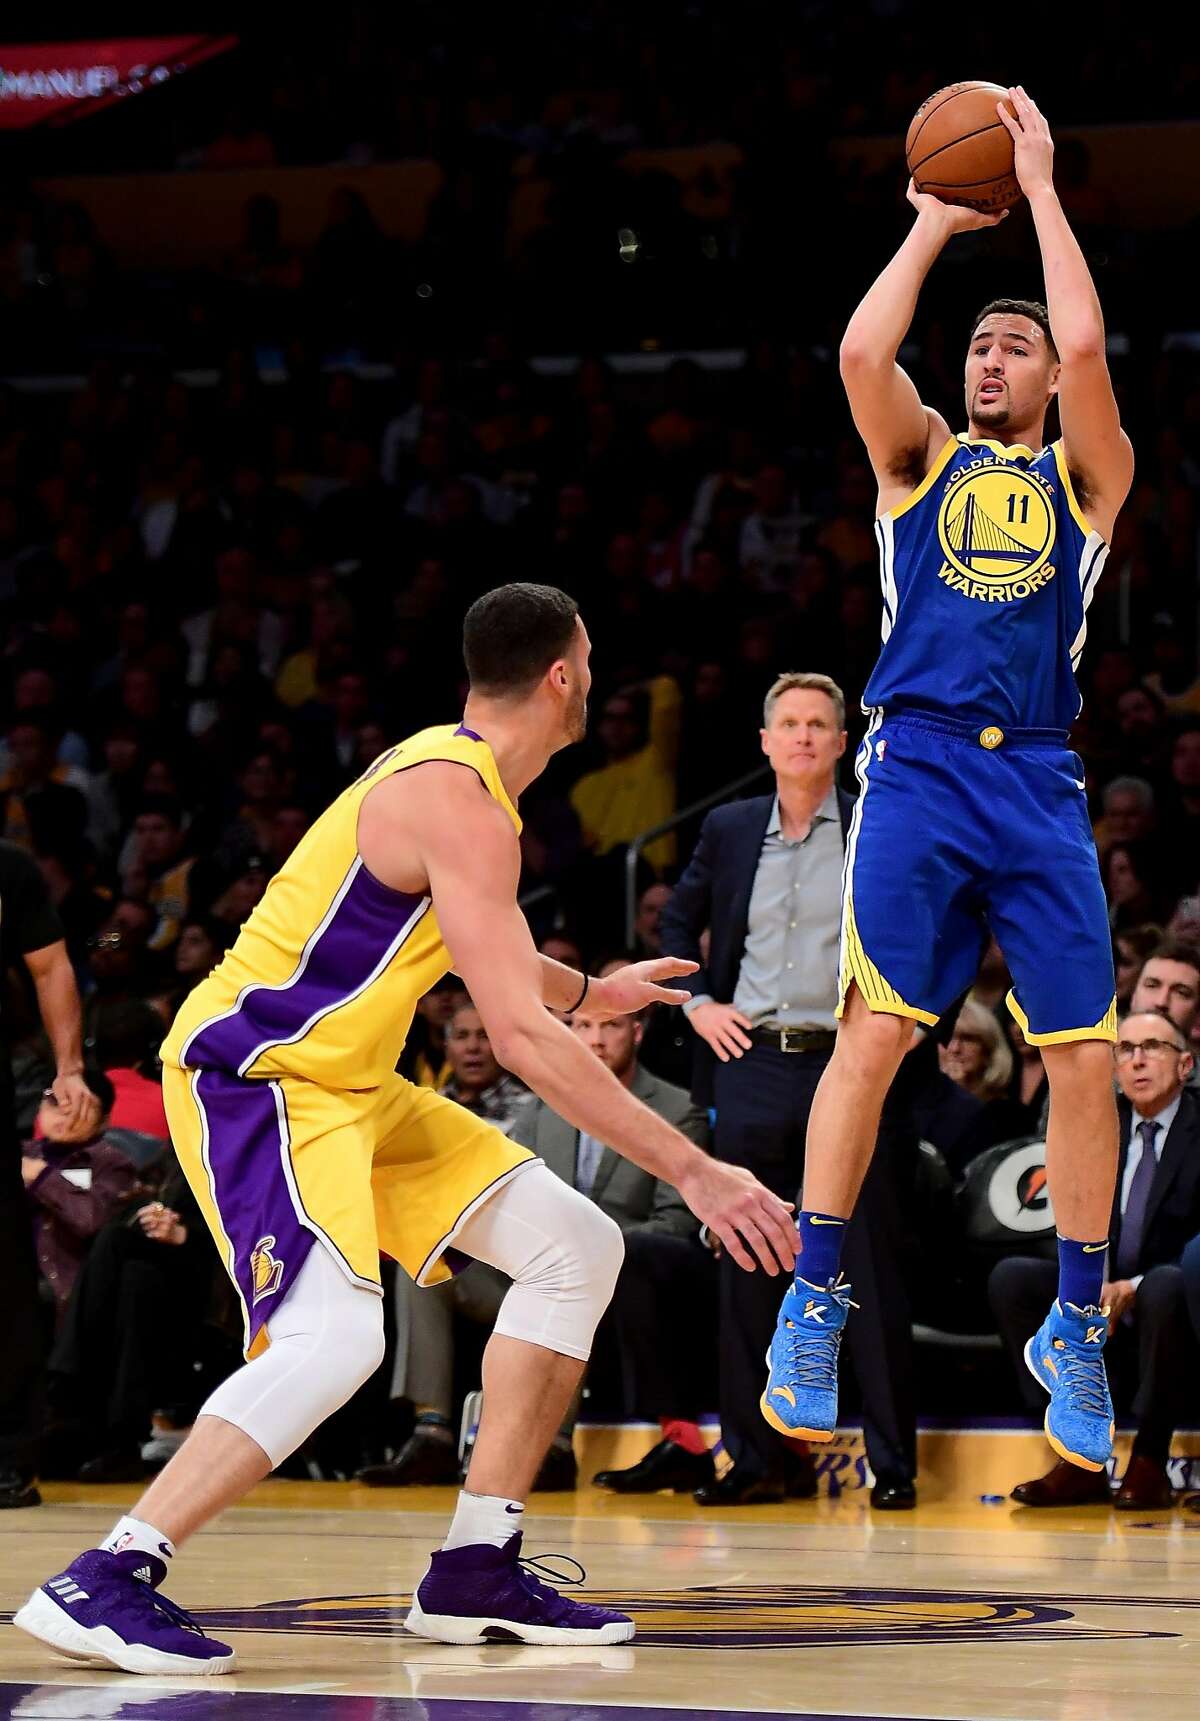 Klay Thompson of the Golden State Warriors shoots over Larry Nance Jr. of the Los Angeles Lakers in the first quarter at Staples Center on December 18, 2017 in Los Angeles, California.